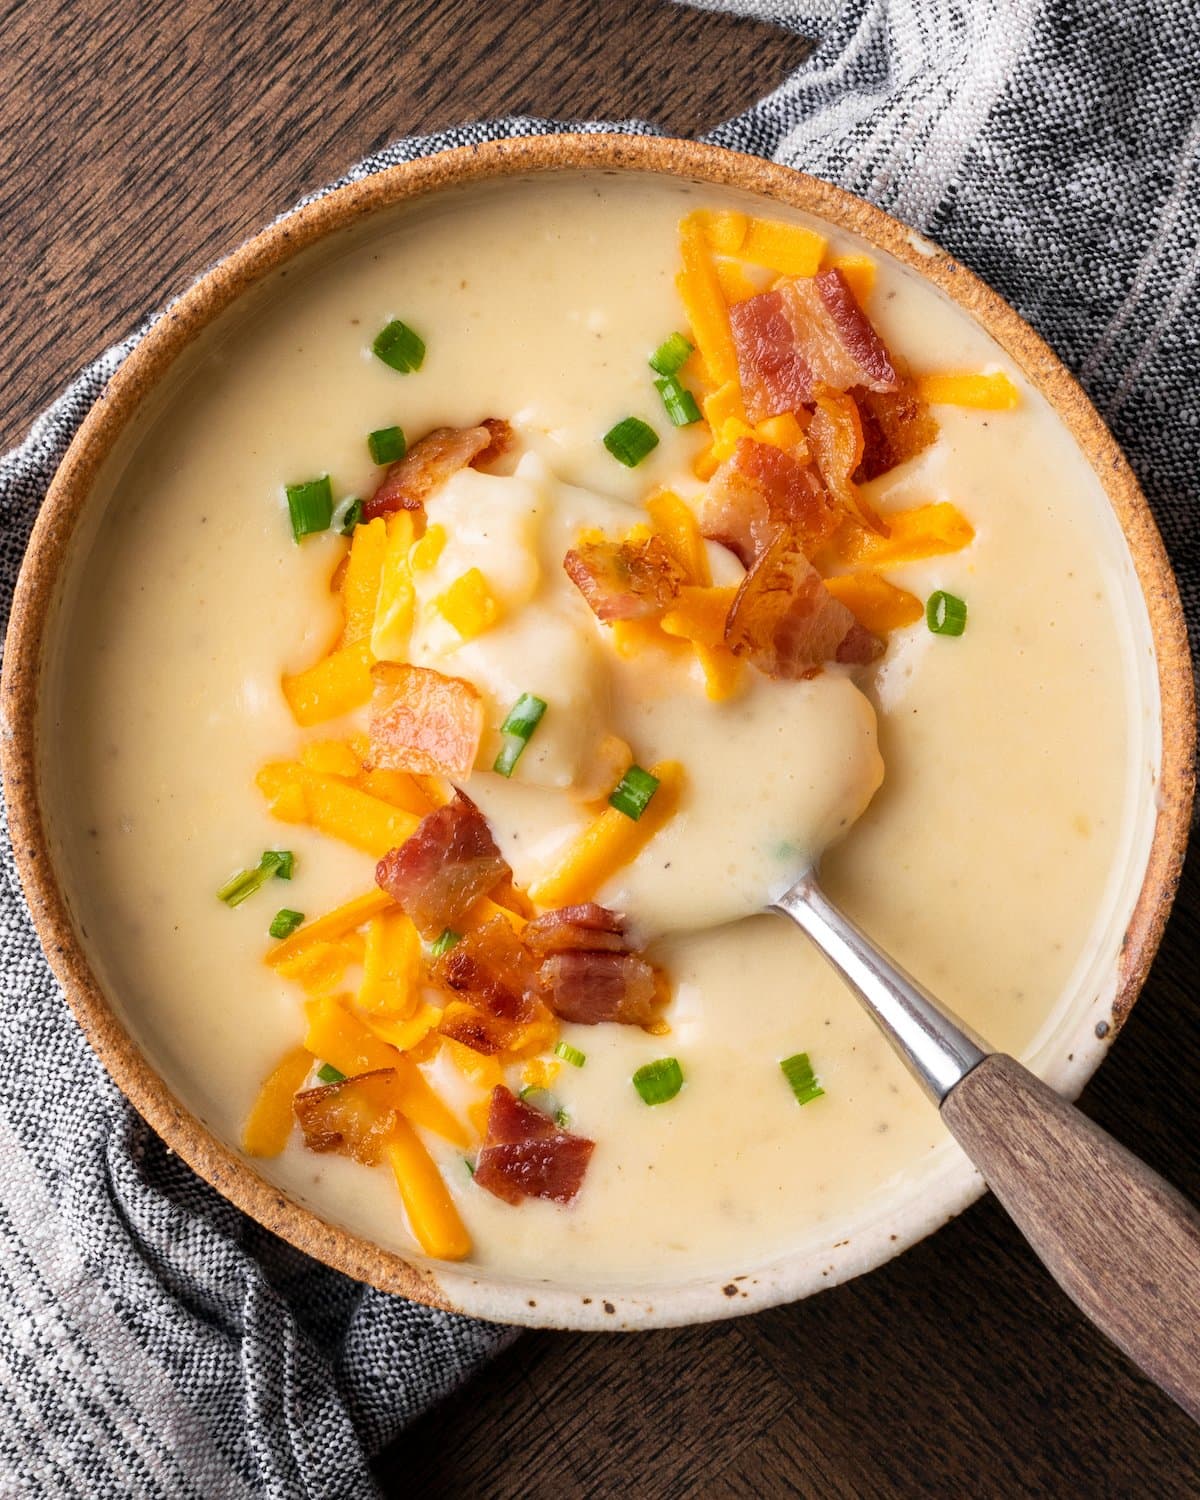 Top view of Instant Pot potato soup garnished with bacon, cheese, and chives, with a spoon.